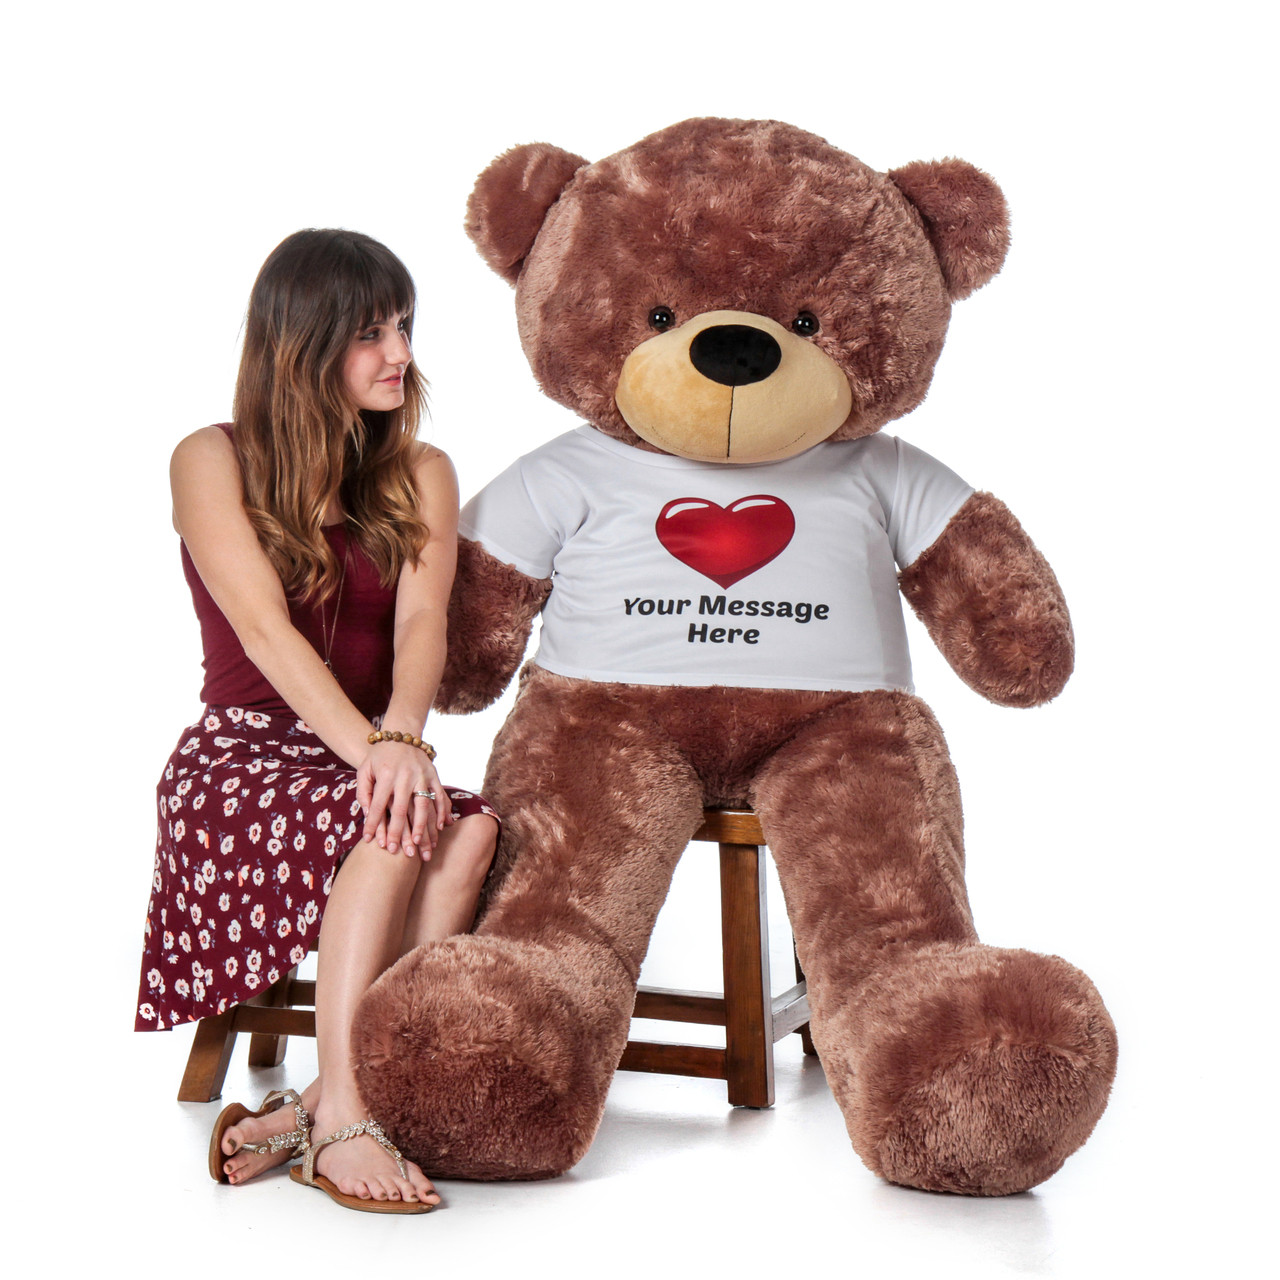 Buy 2 feet big brown teddy bear wearing Happy Mothers Day designer heart  T-shirt Online at Lowest Price in India